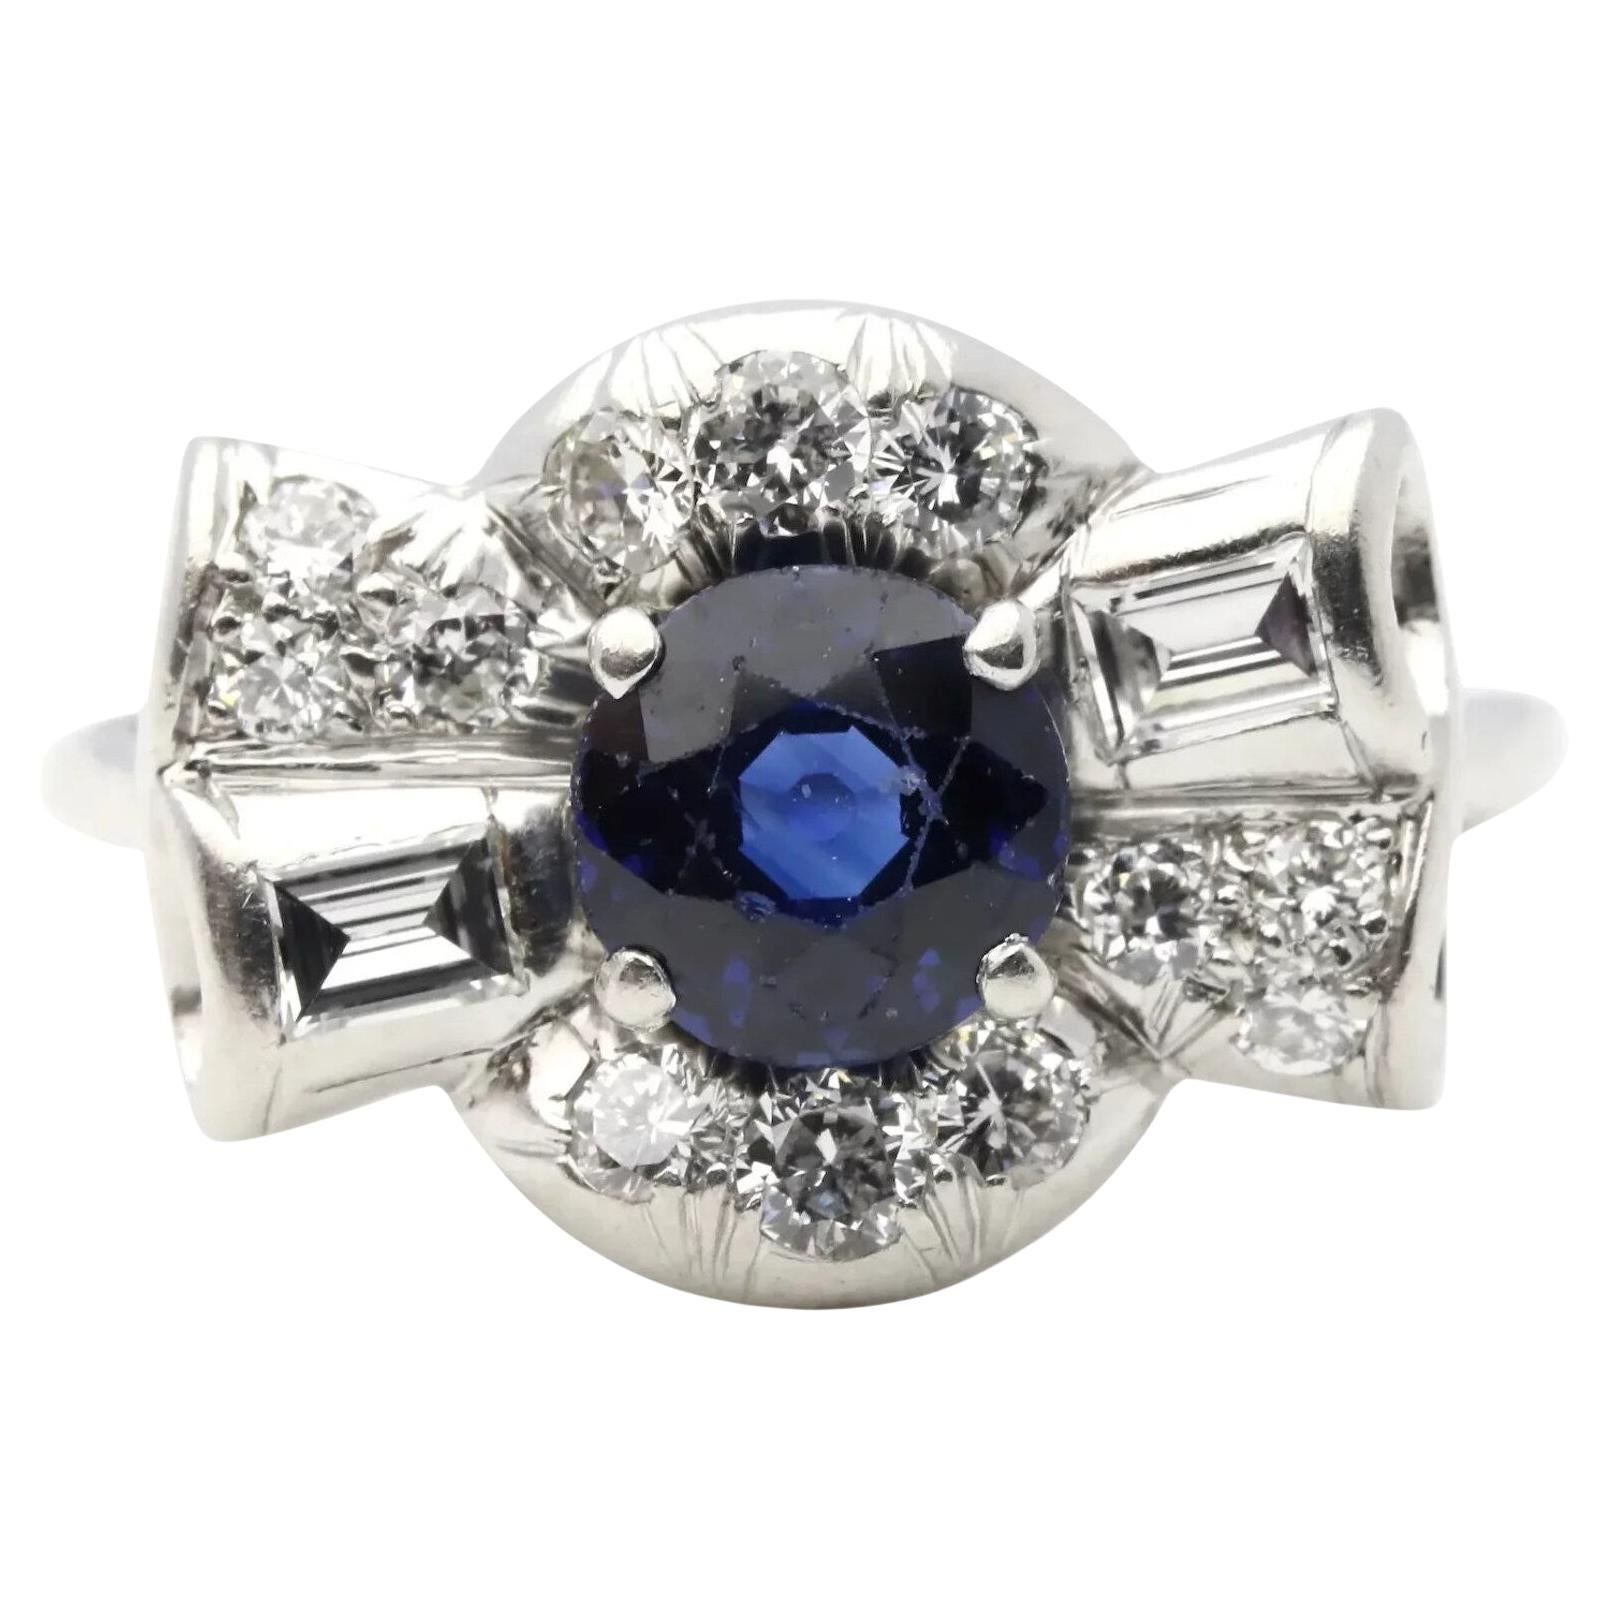 Sapphire & Diamond Bow Motif Ring in Platinum by Maurice Tishman